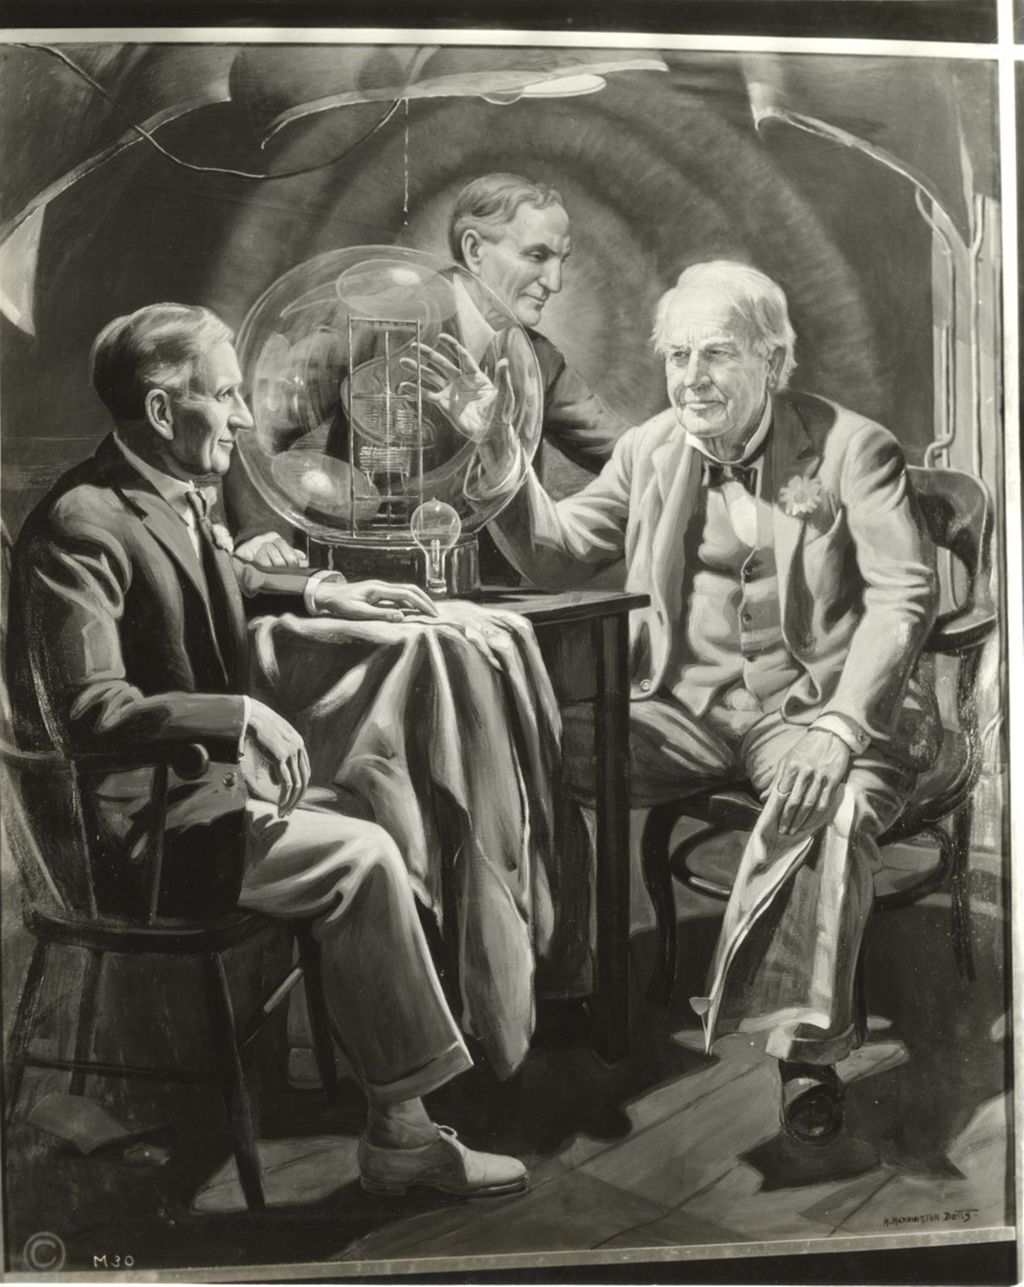 Portrait of Edison, Ford, and Firestone done by H. Harrington Betts on display in Electric Light and Power Industry's exhibit